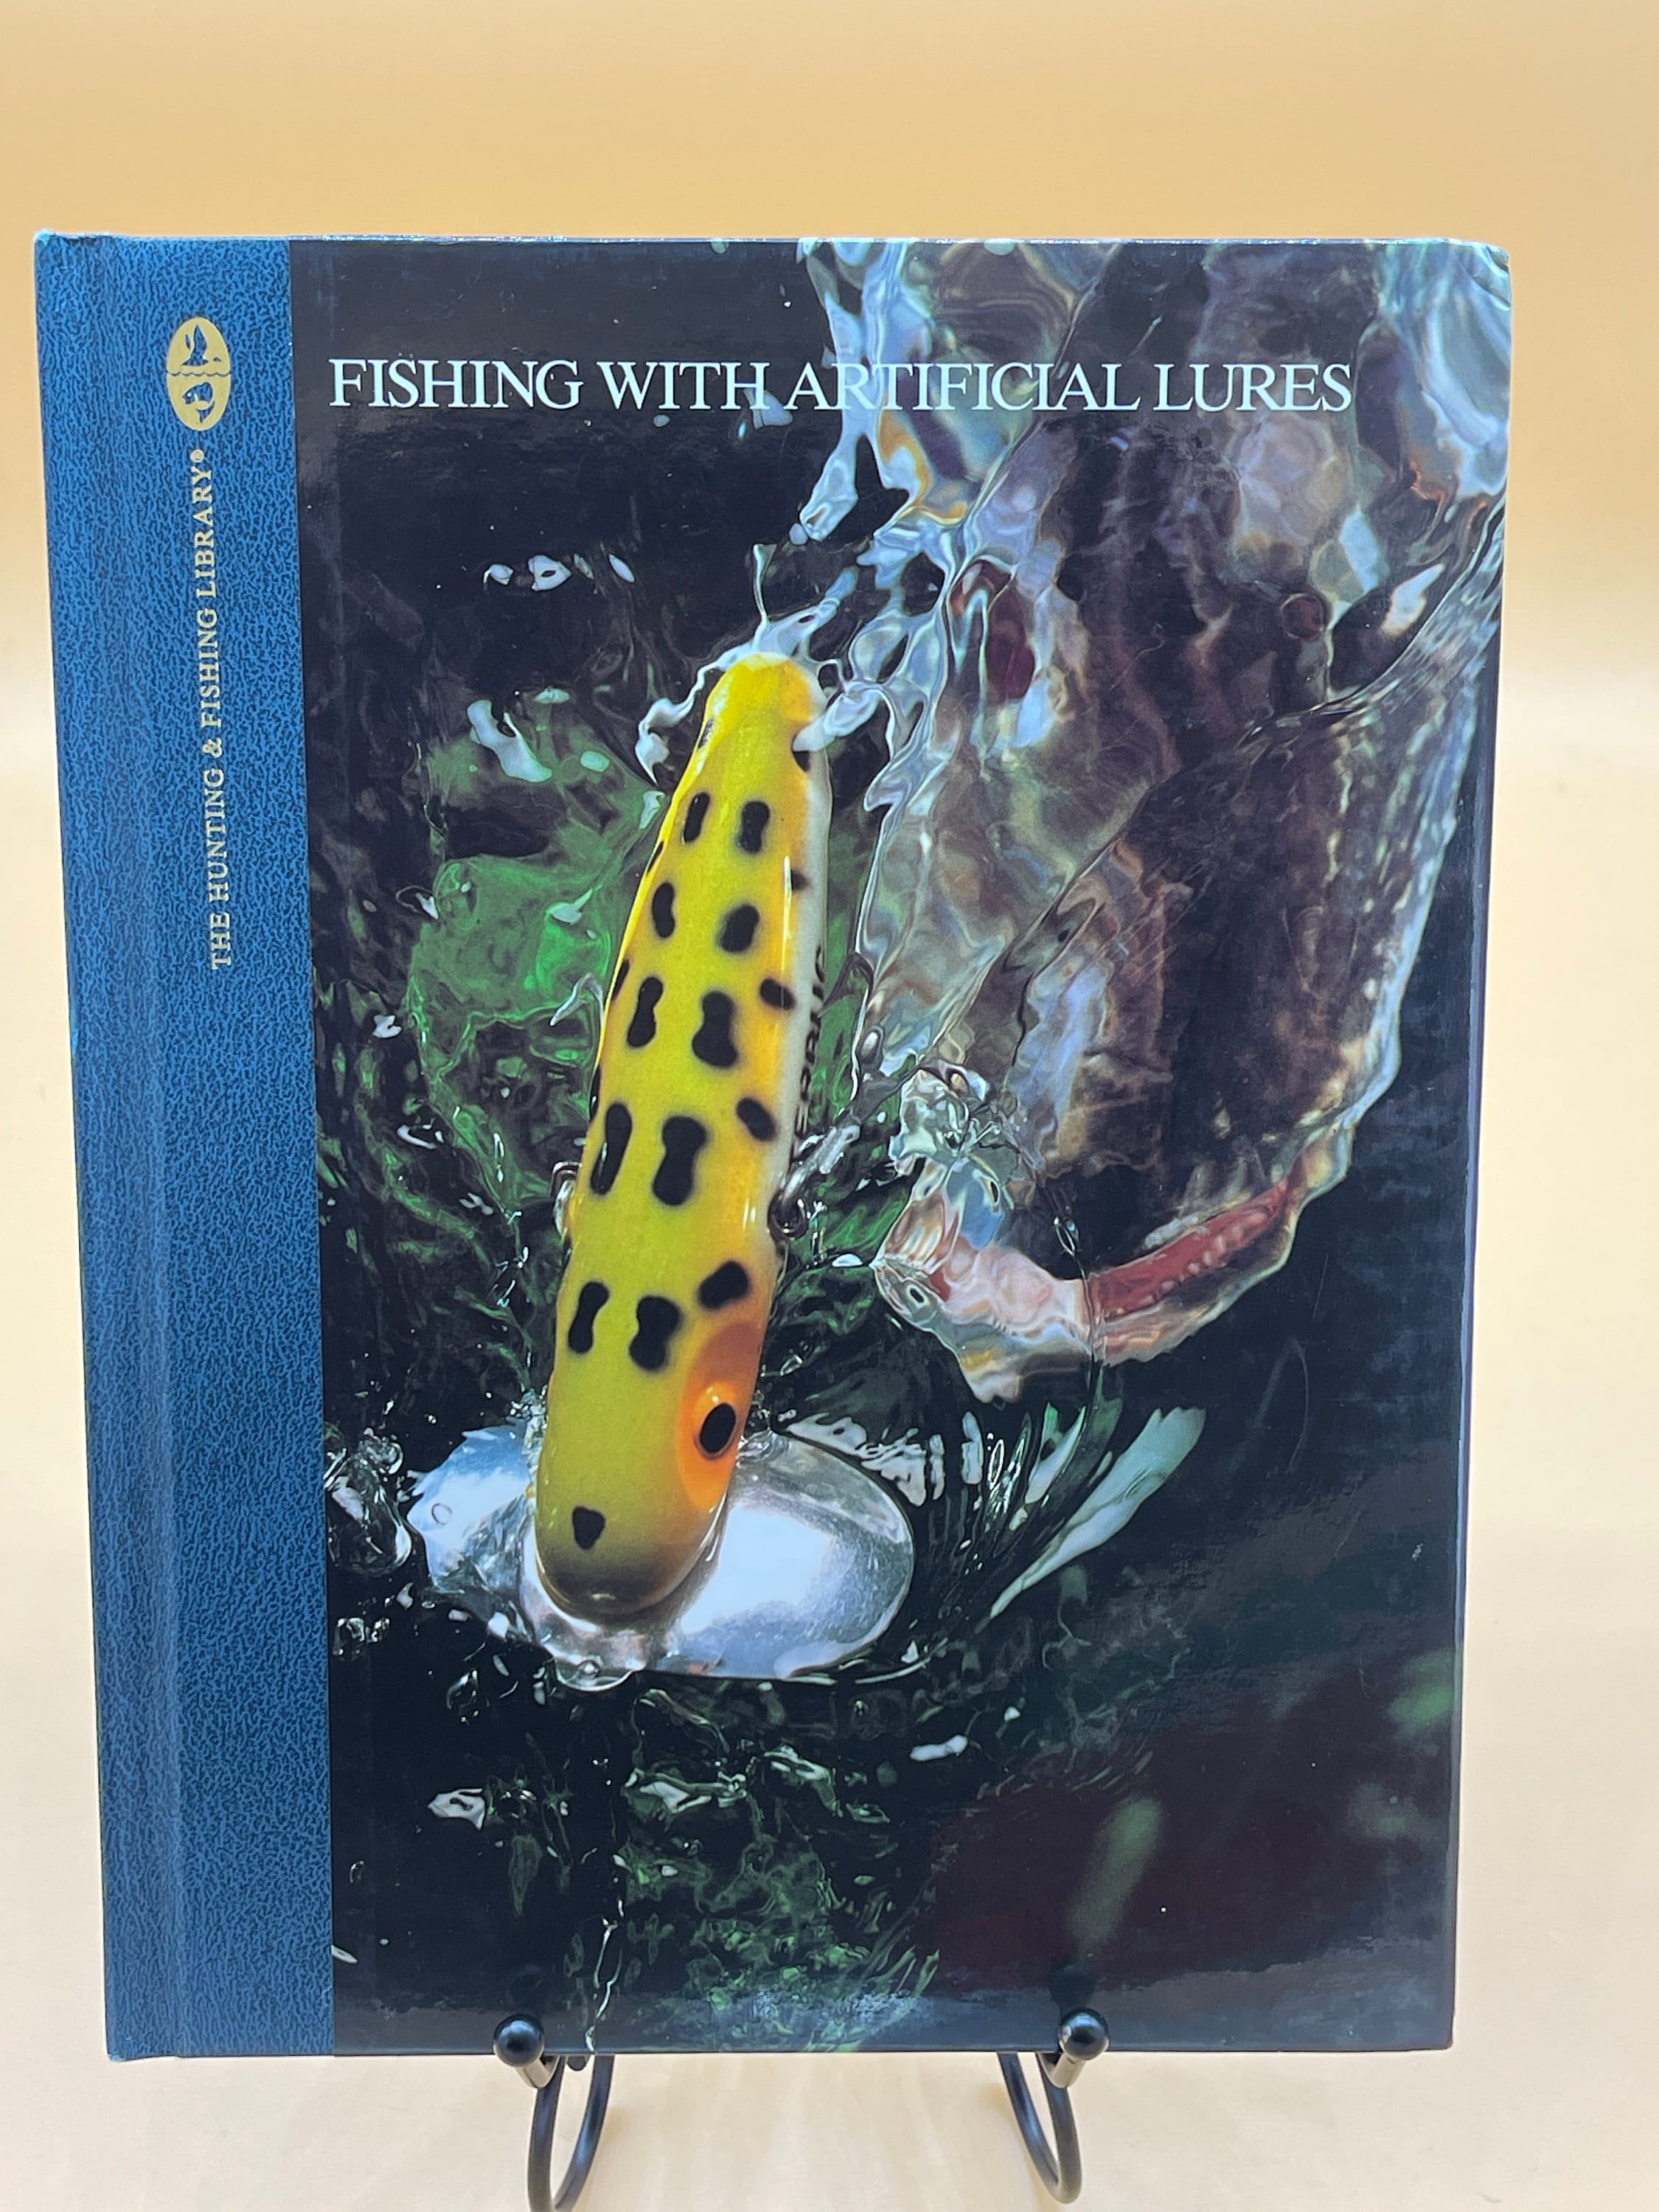 Fishing Books Fishing With Artificial Lures From the Time Life Hunting and Fishing  Library Series Circa 1990's Gifts for Fishermen Books 